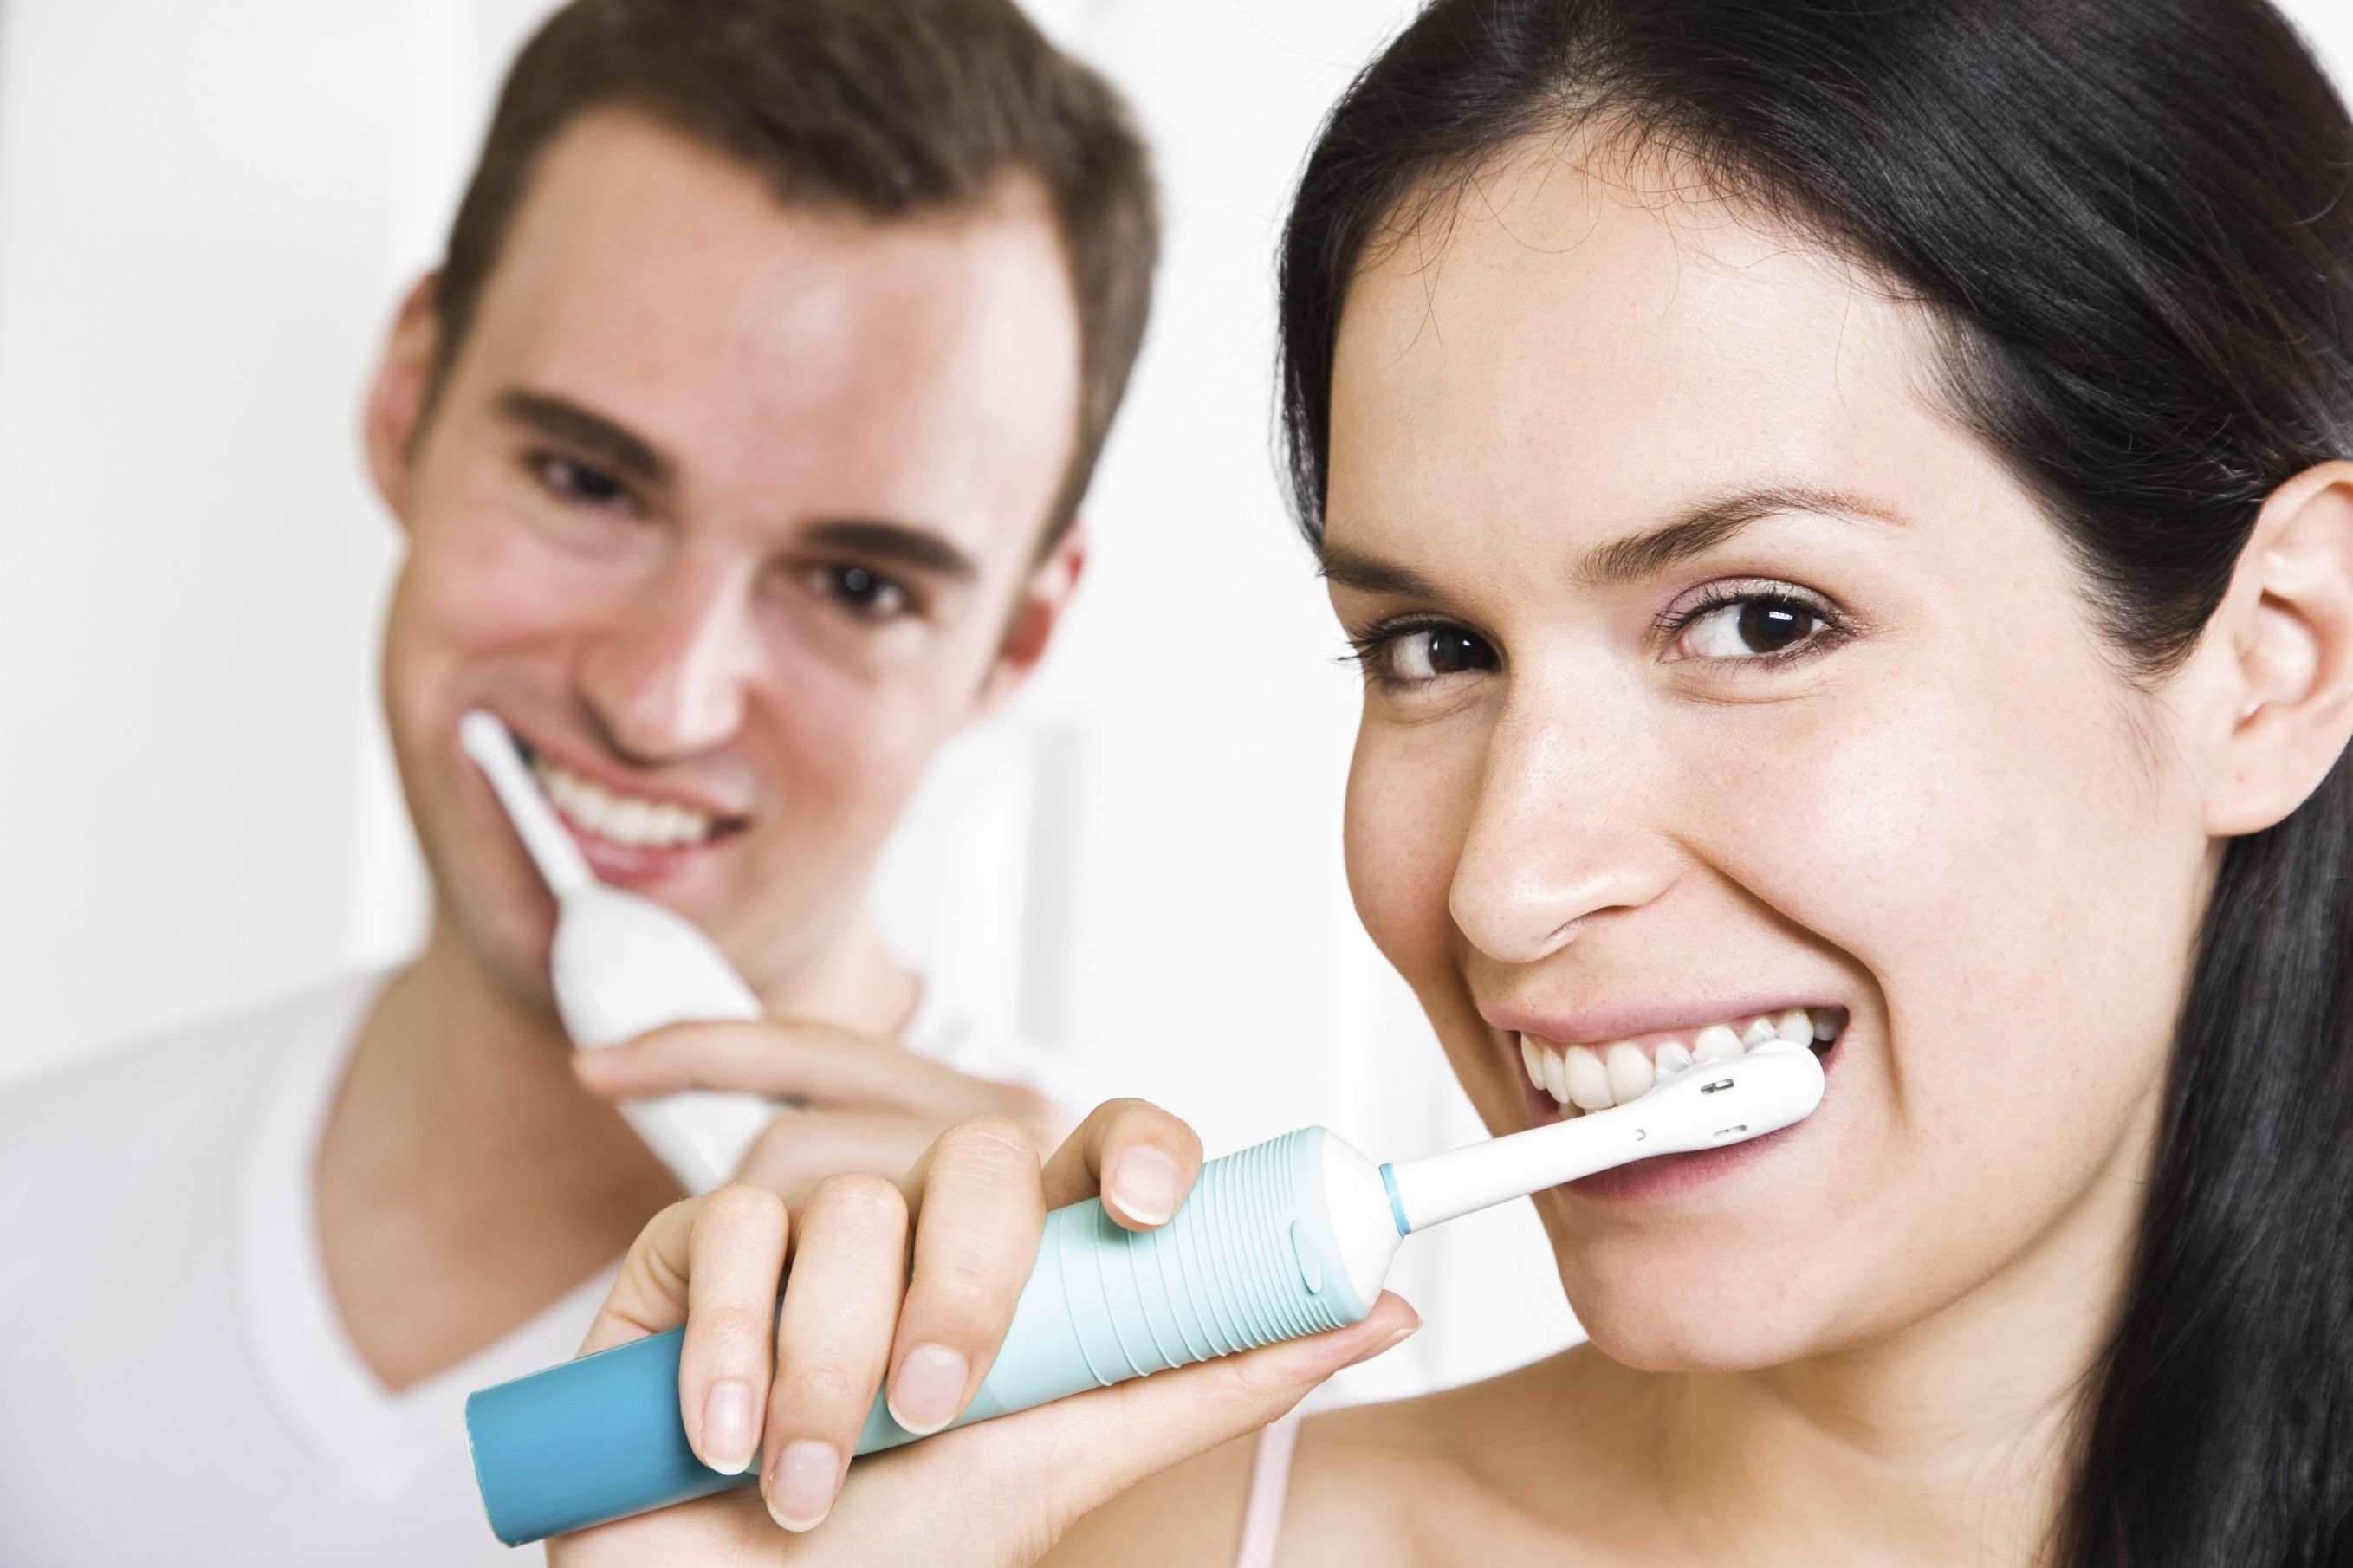 Review of the best Oral-B electric toothbrushes